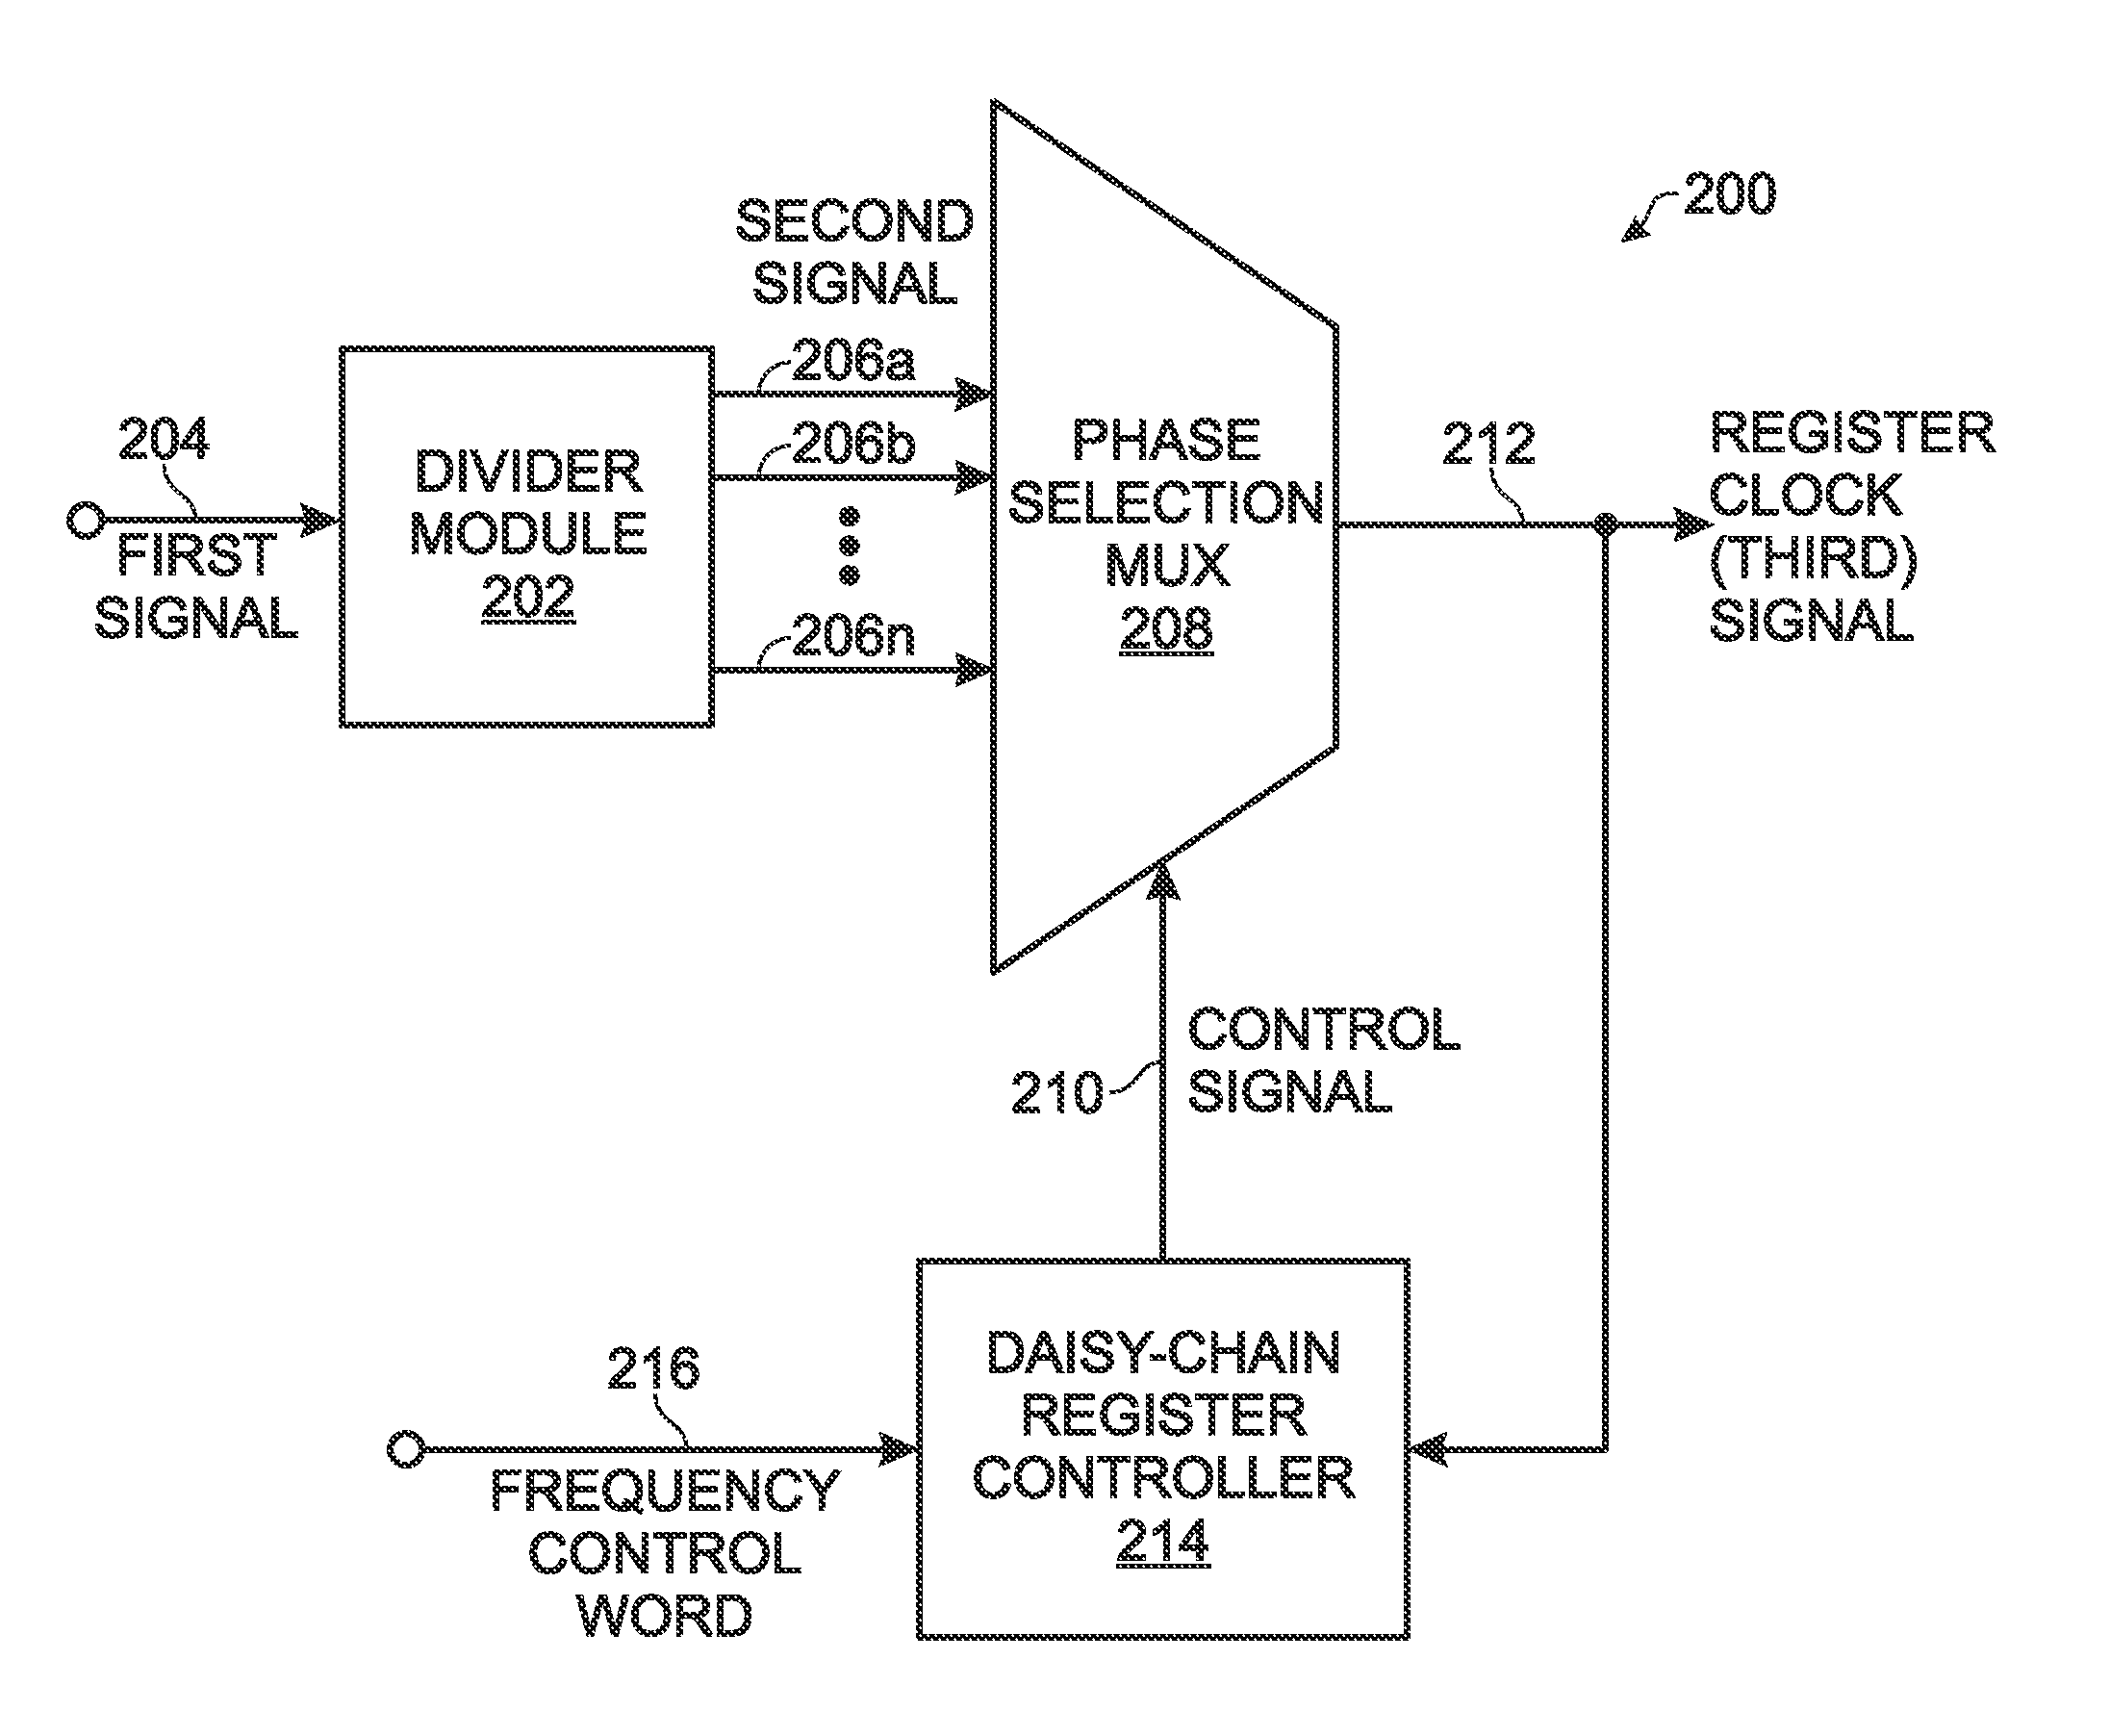 Digitally clock with selectable frequency and duty cycle